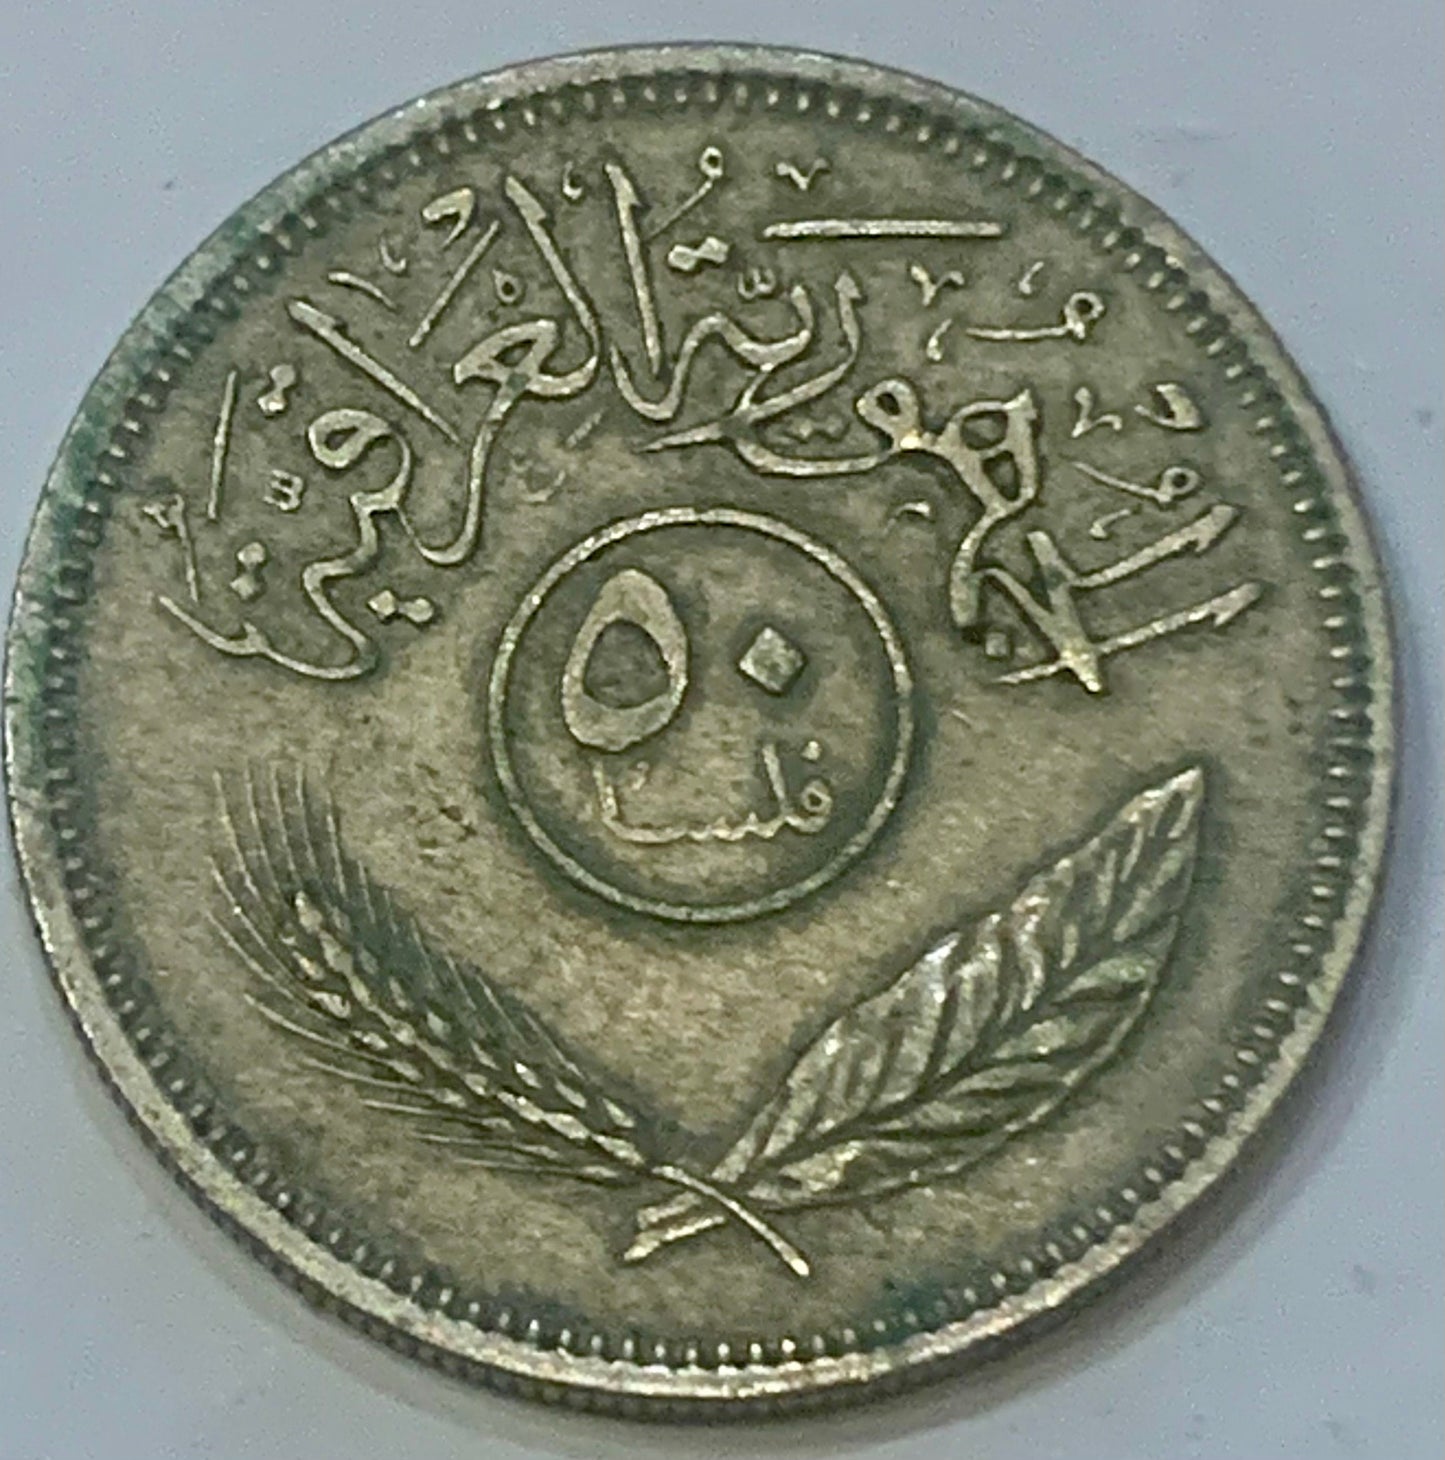 Own a Tangible Link to Iraqi Heritage: Iraq 50 Fils, 1970 Treasure & GIFT